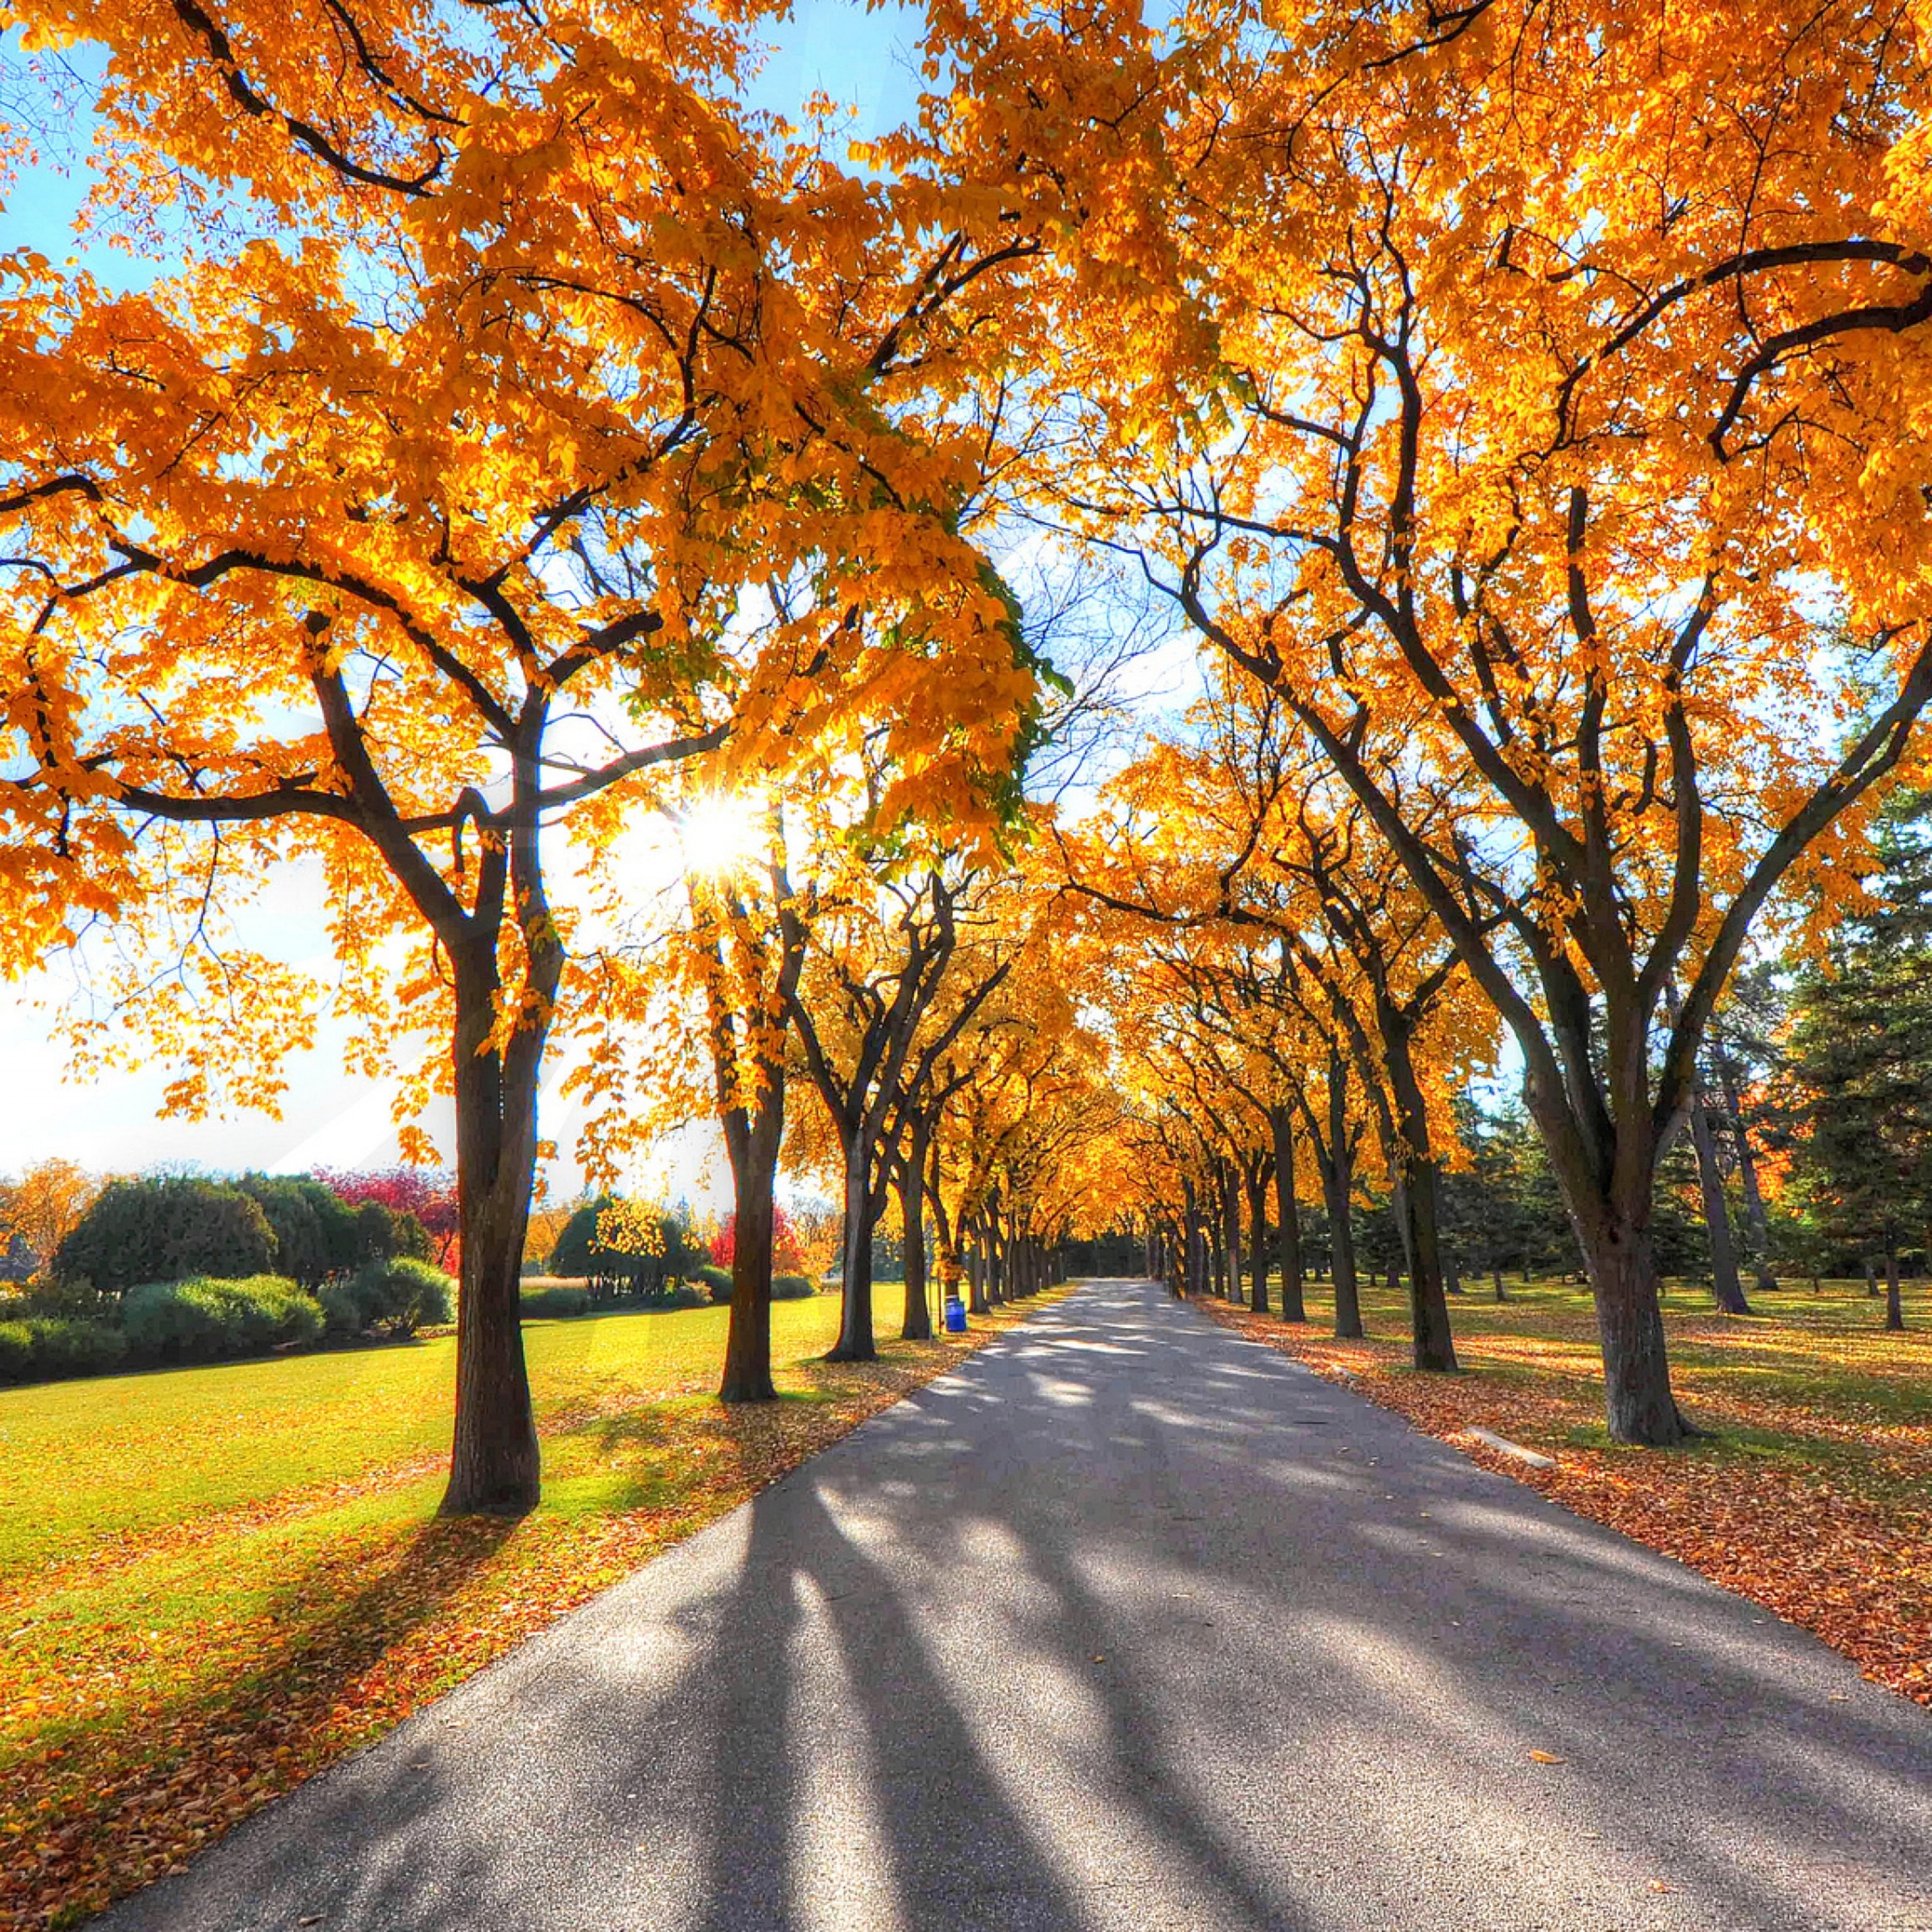 Autumn Alley Park iPad Pro Retina Display HD 4k Wallpaper, Image, Background, Photo and Picture